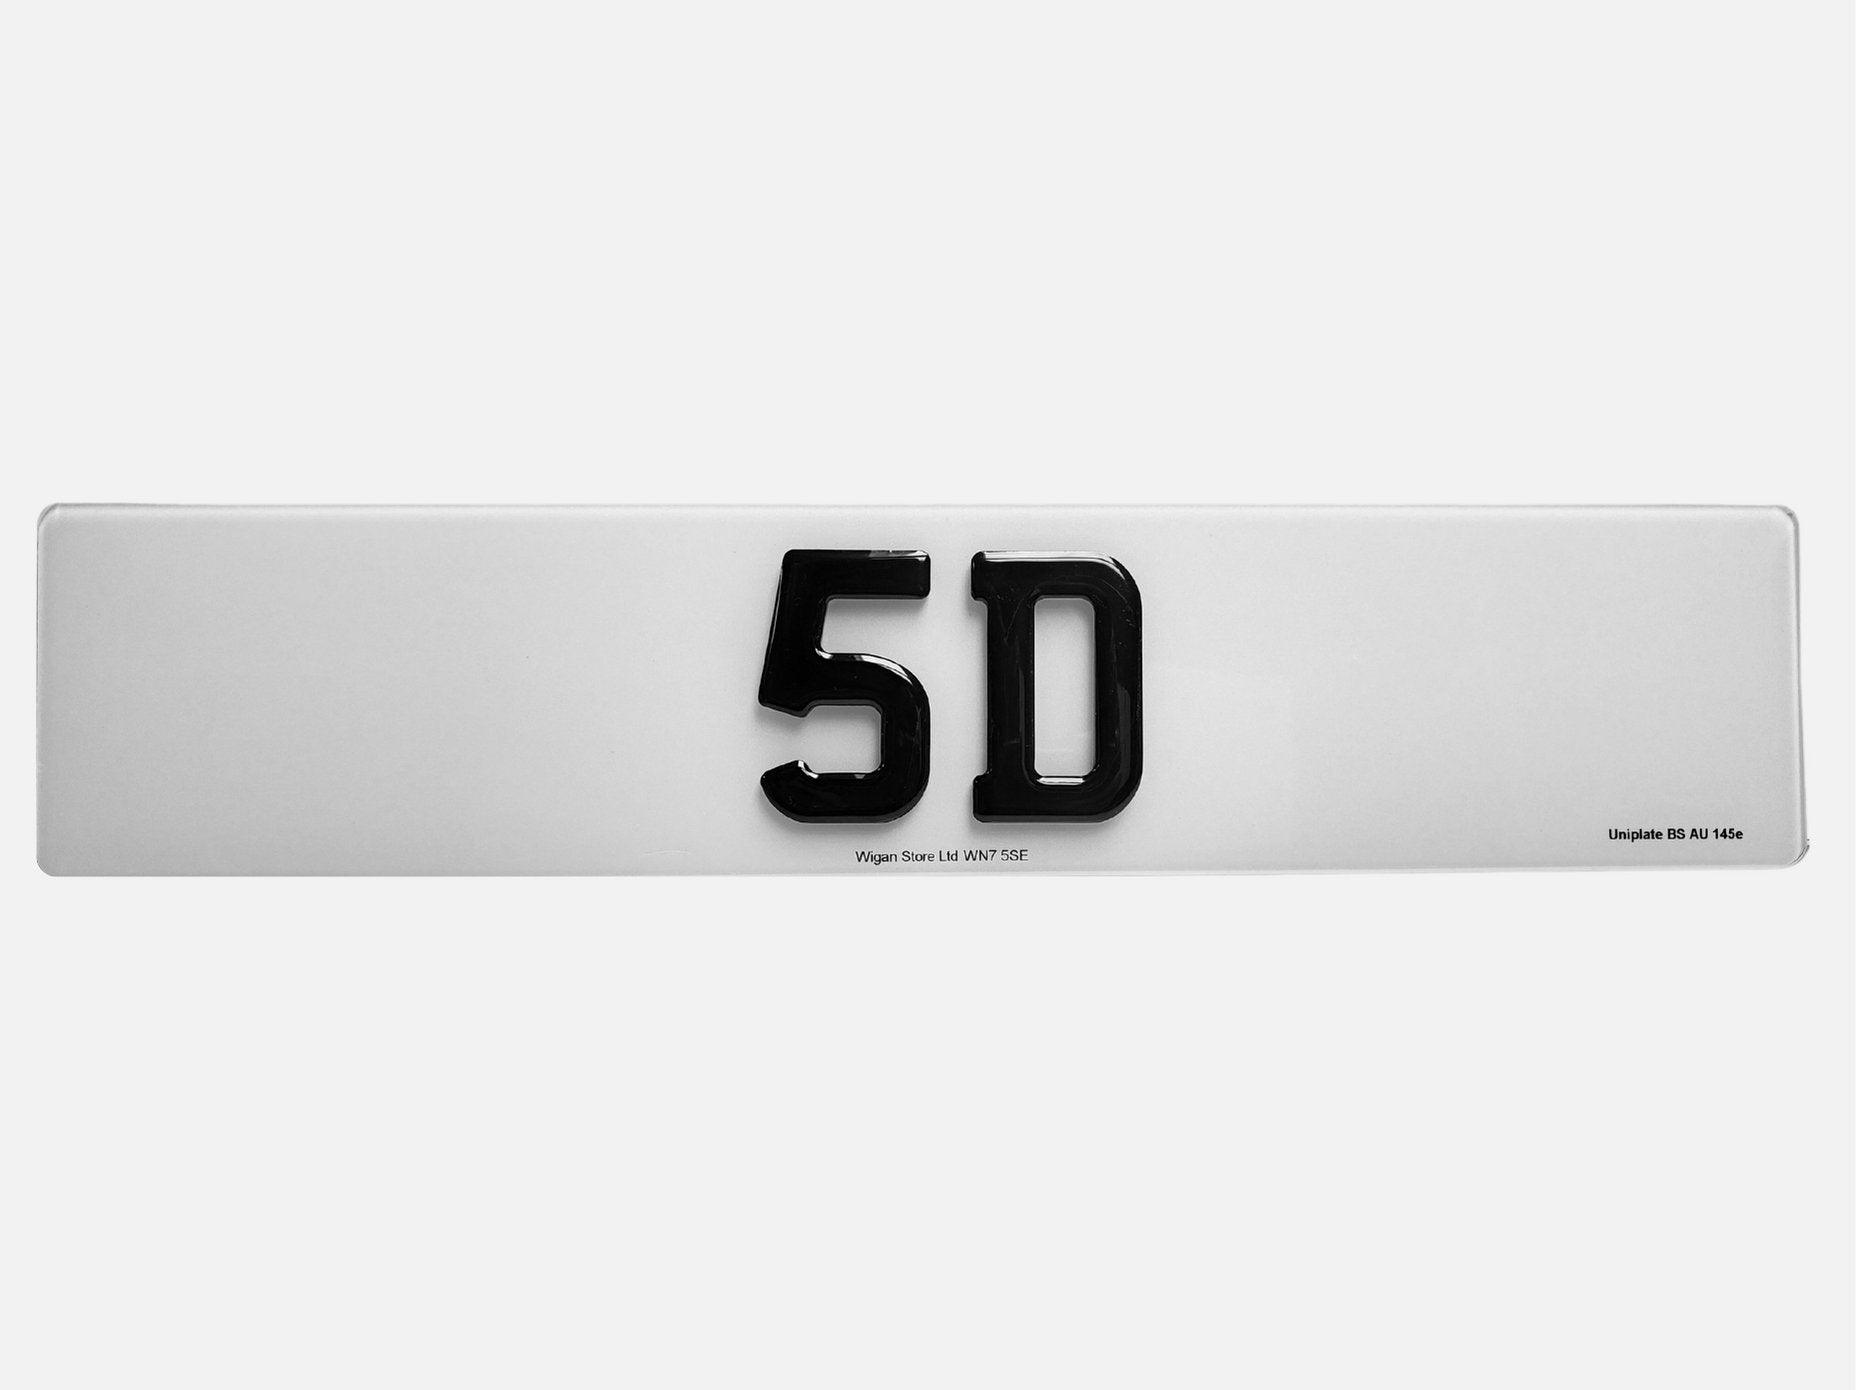 Pair of 4D Acrylic PLUS 3D Gel ON TOP Number Plates, Gloss Black, Road Legal Plates - Leigh Number Plates